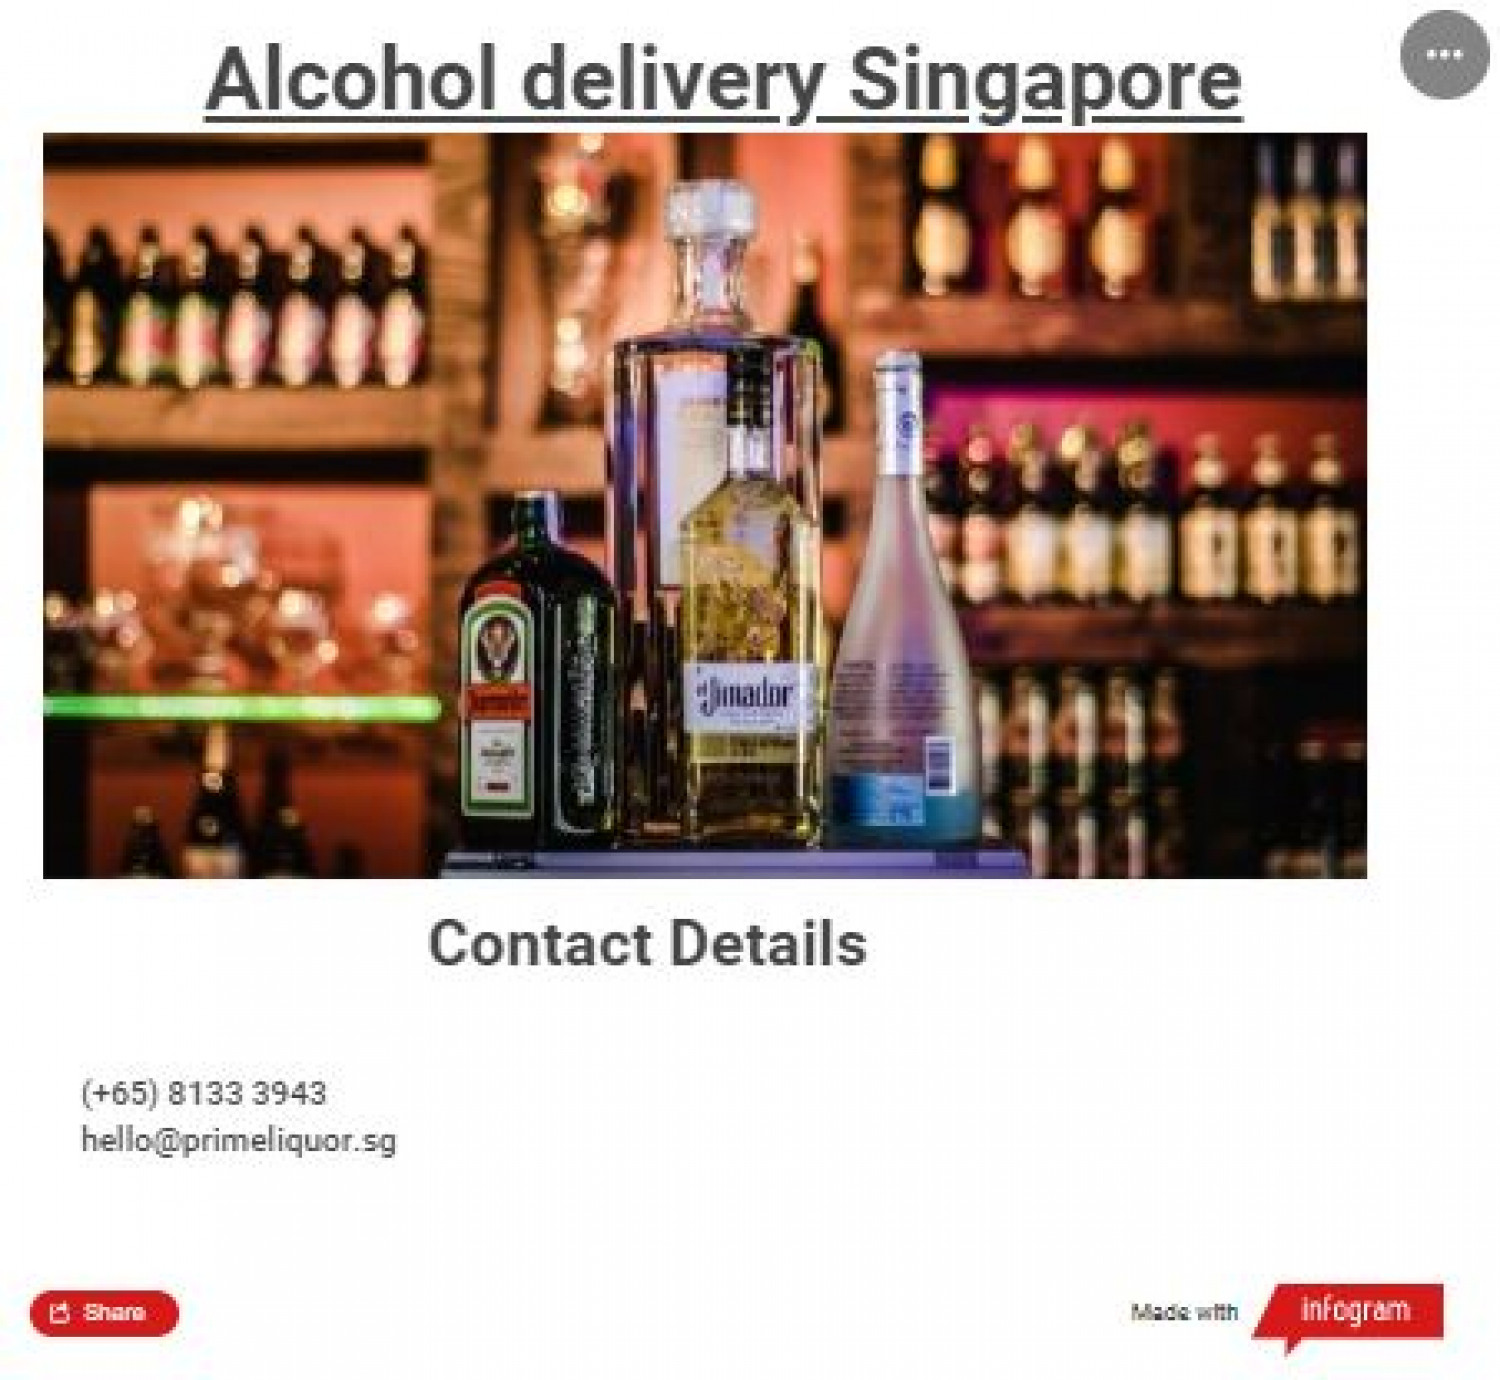 Alcohol delivery Singapore Infographic